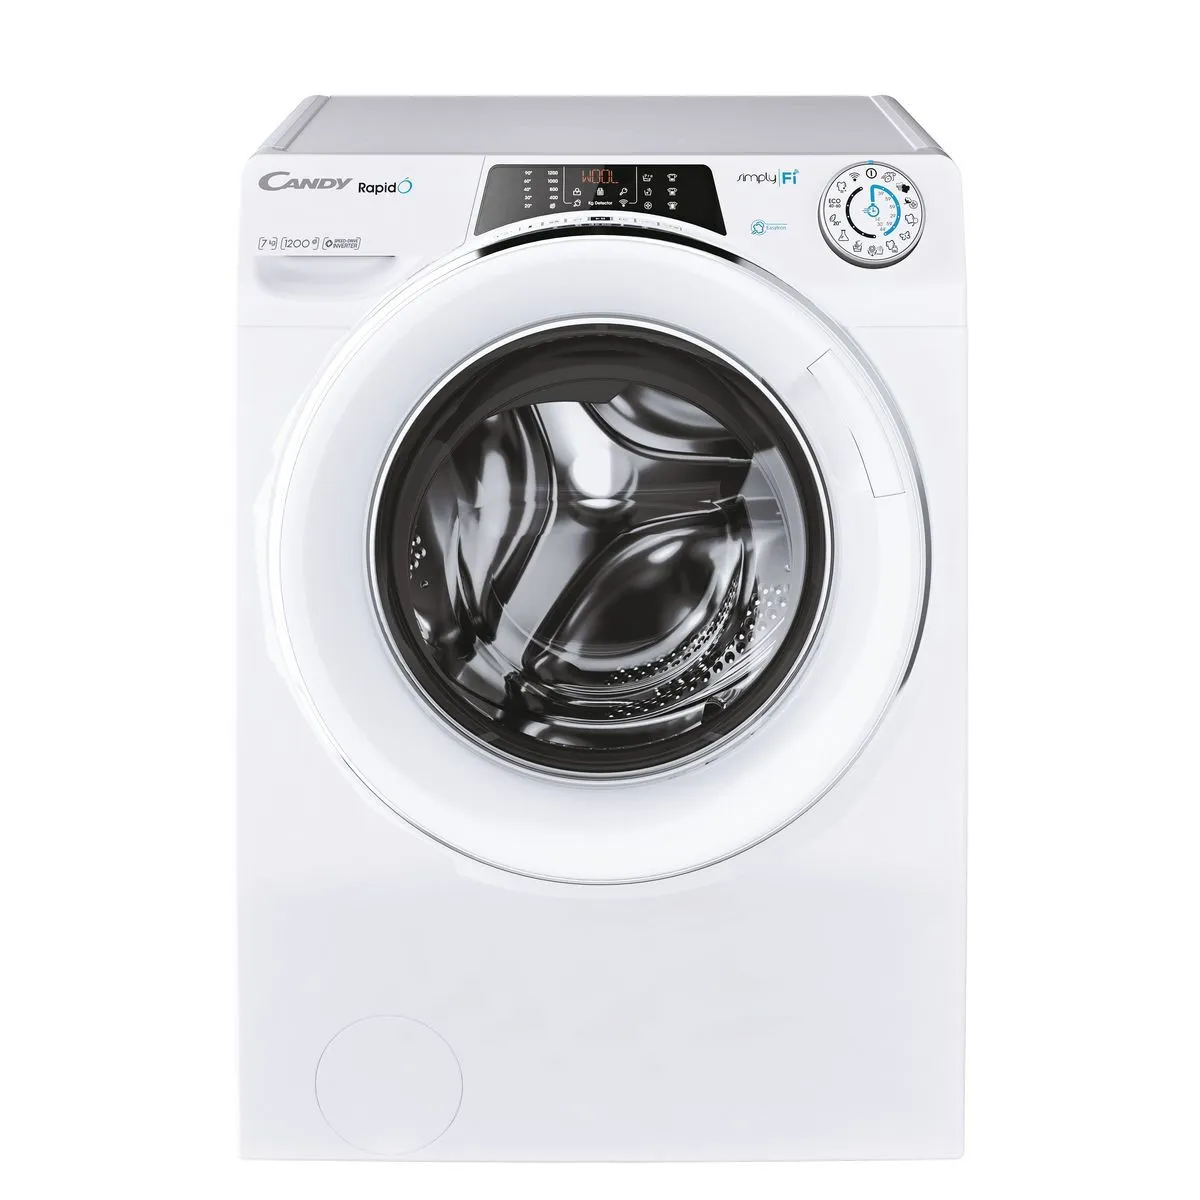 lave-linge candy ro41274dwmce/1-s